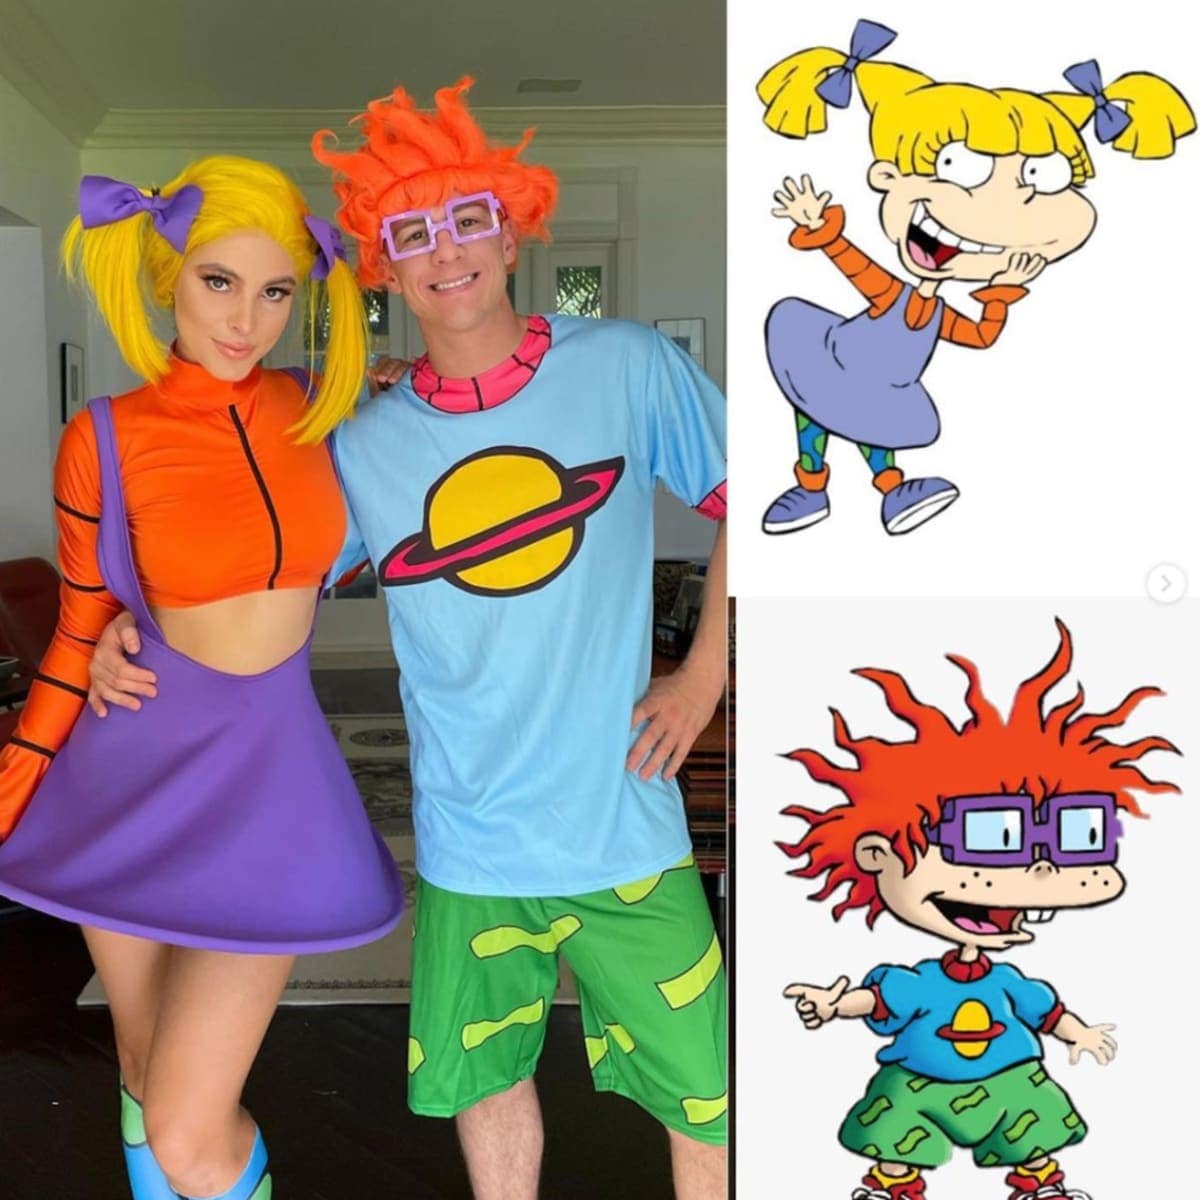 Lele Pons and Guaynaa tap into their inner child and become Rugrats characters for Halloween